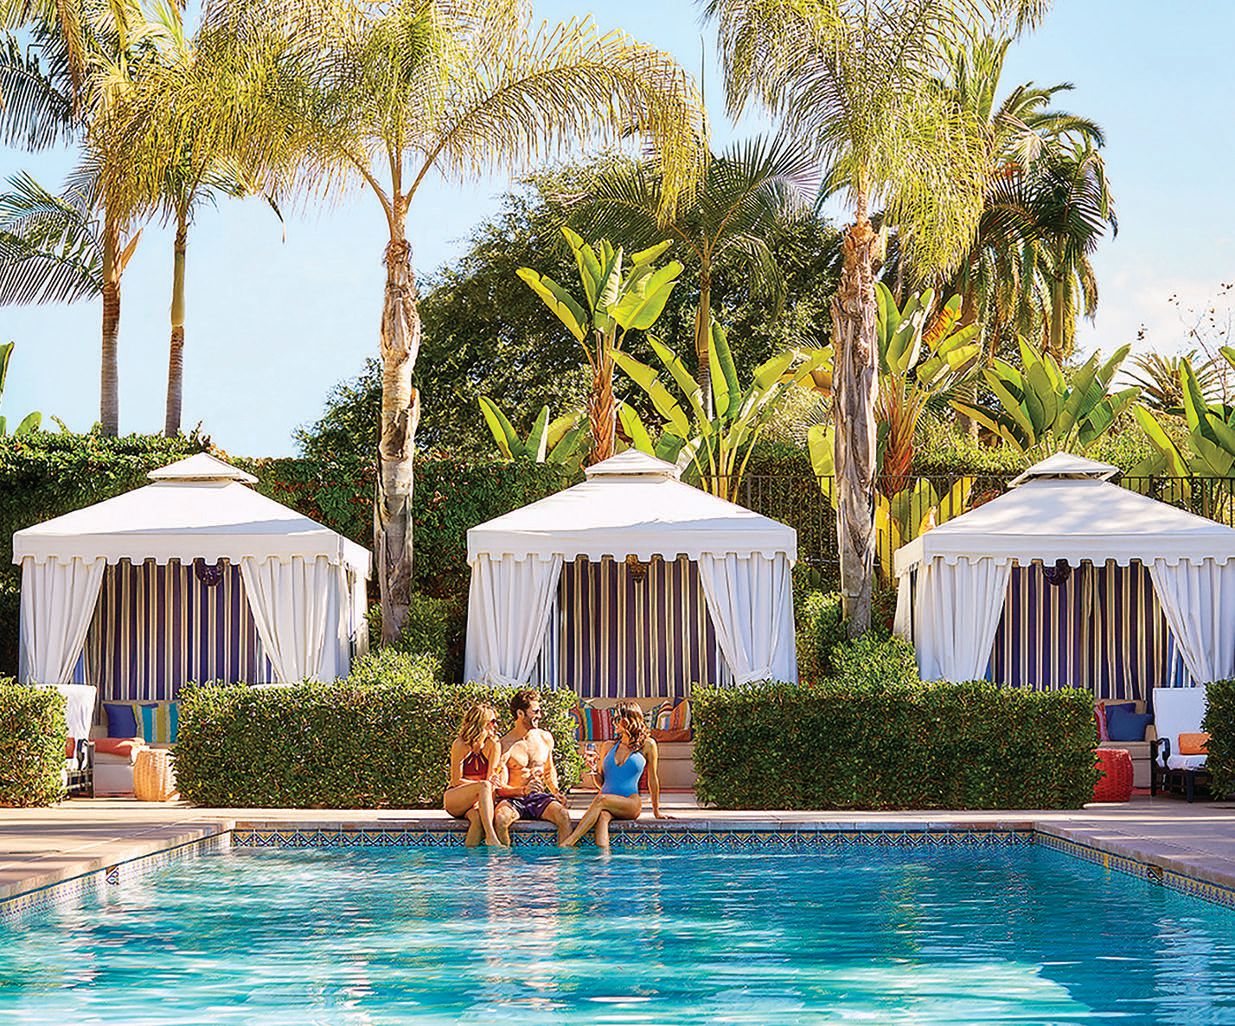 Rancho Valencia Resort & Spa’s award-winning spa—teamed with its own private pool, shown here—is the perfect place to relax after an exciting day at Del Mar Thoroughbred Club. PHOTO COURTESY OF BRANDS